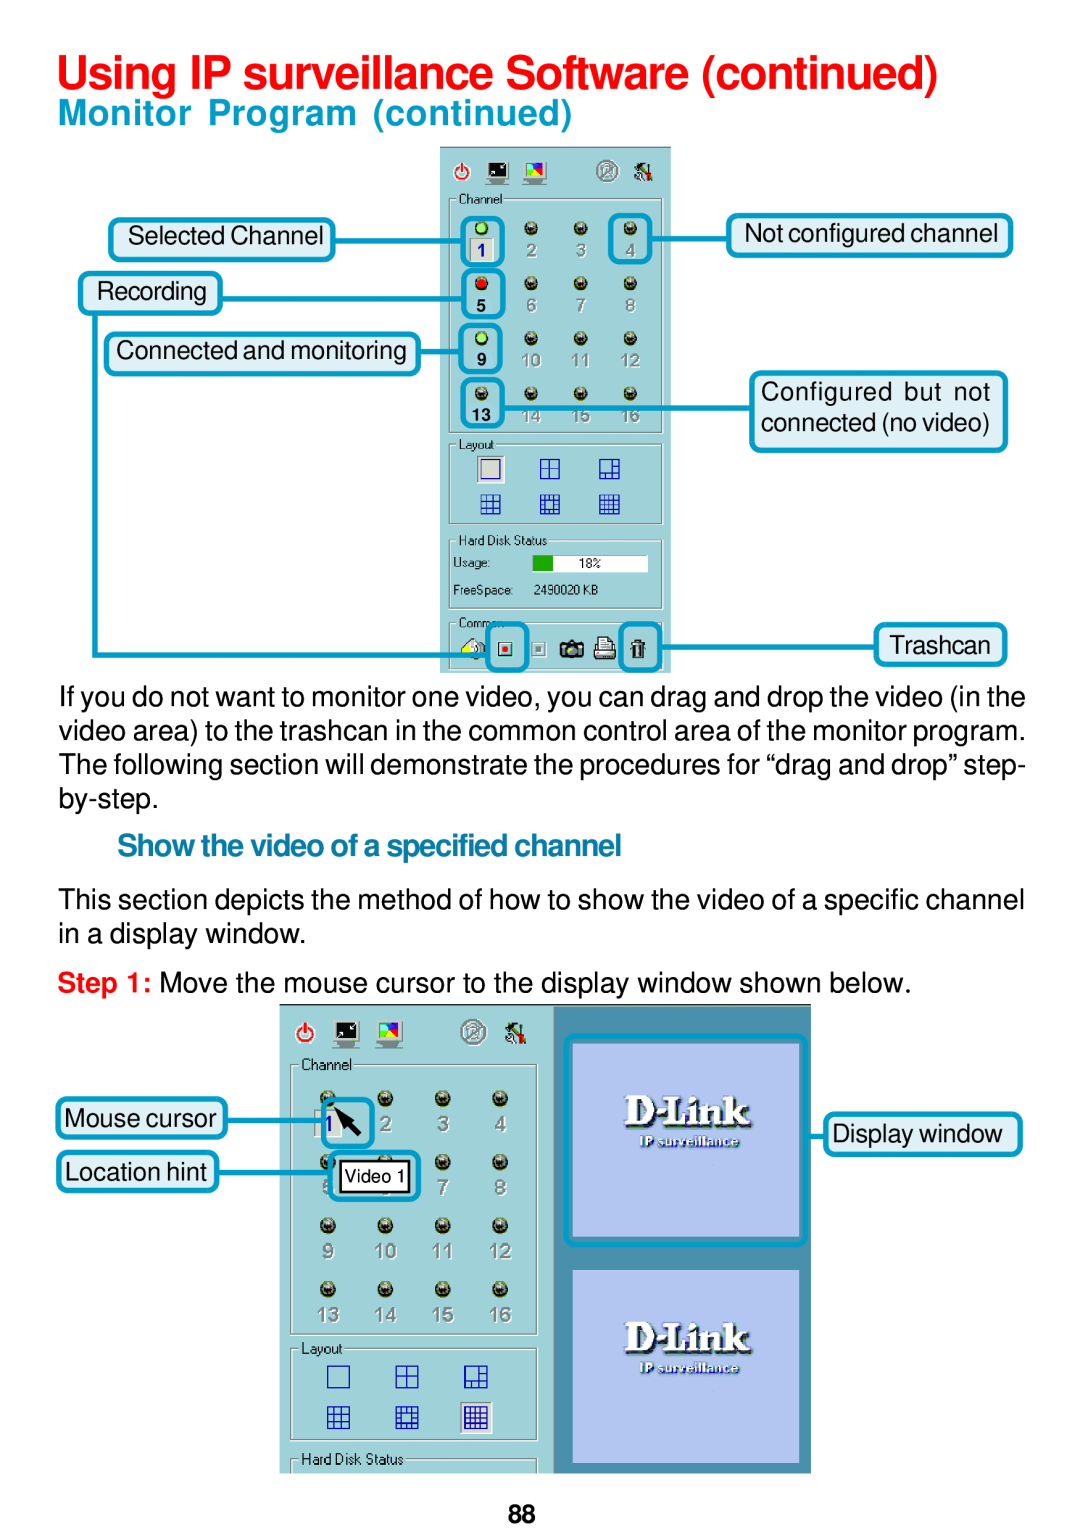 D-Link DCS-5300 Show the video of a specified channel, Using IP surveillance Software continued, Monitor Program continued 